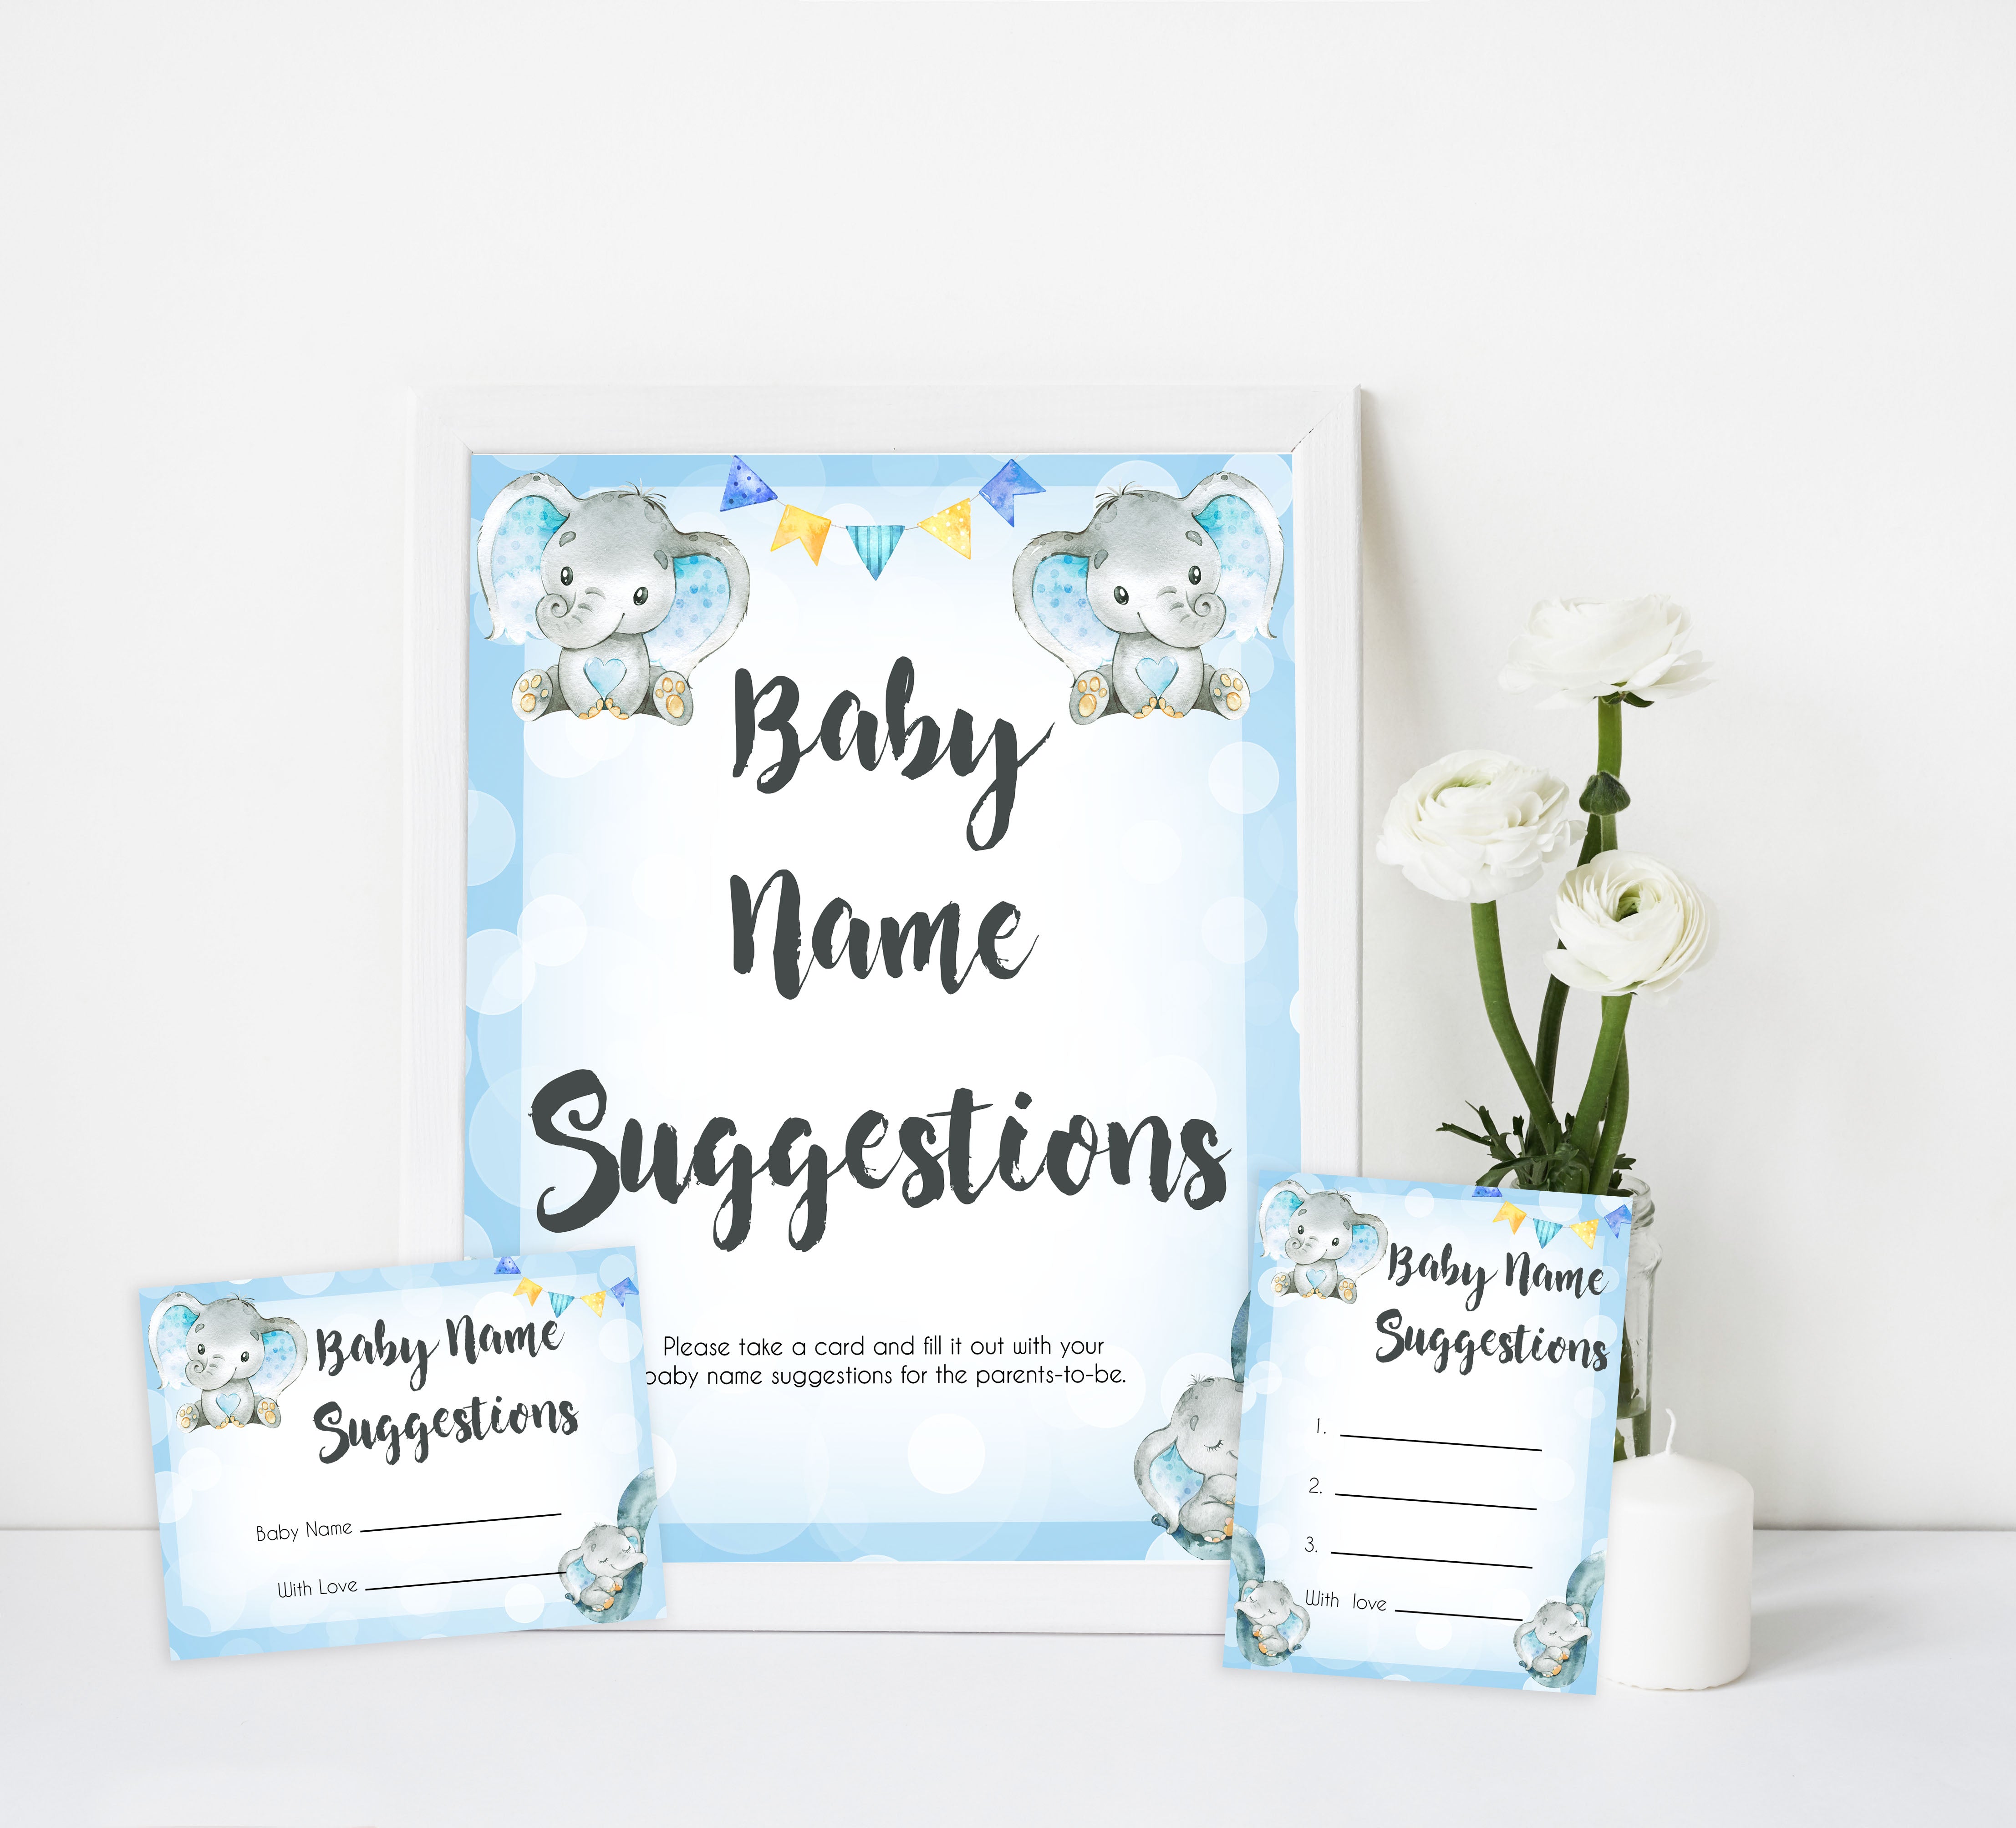  Blue elephant baby games, baby name suggestions, elephant baby games, printable baby games, top baby games, best baby shower games, baby shower ideas, fun baby games, elephant baby shower